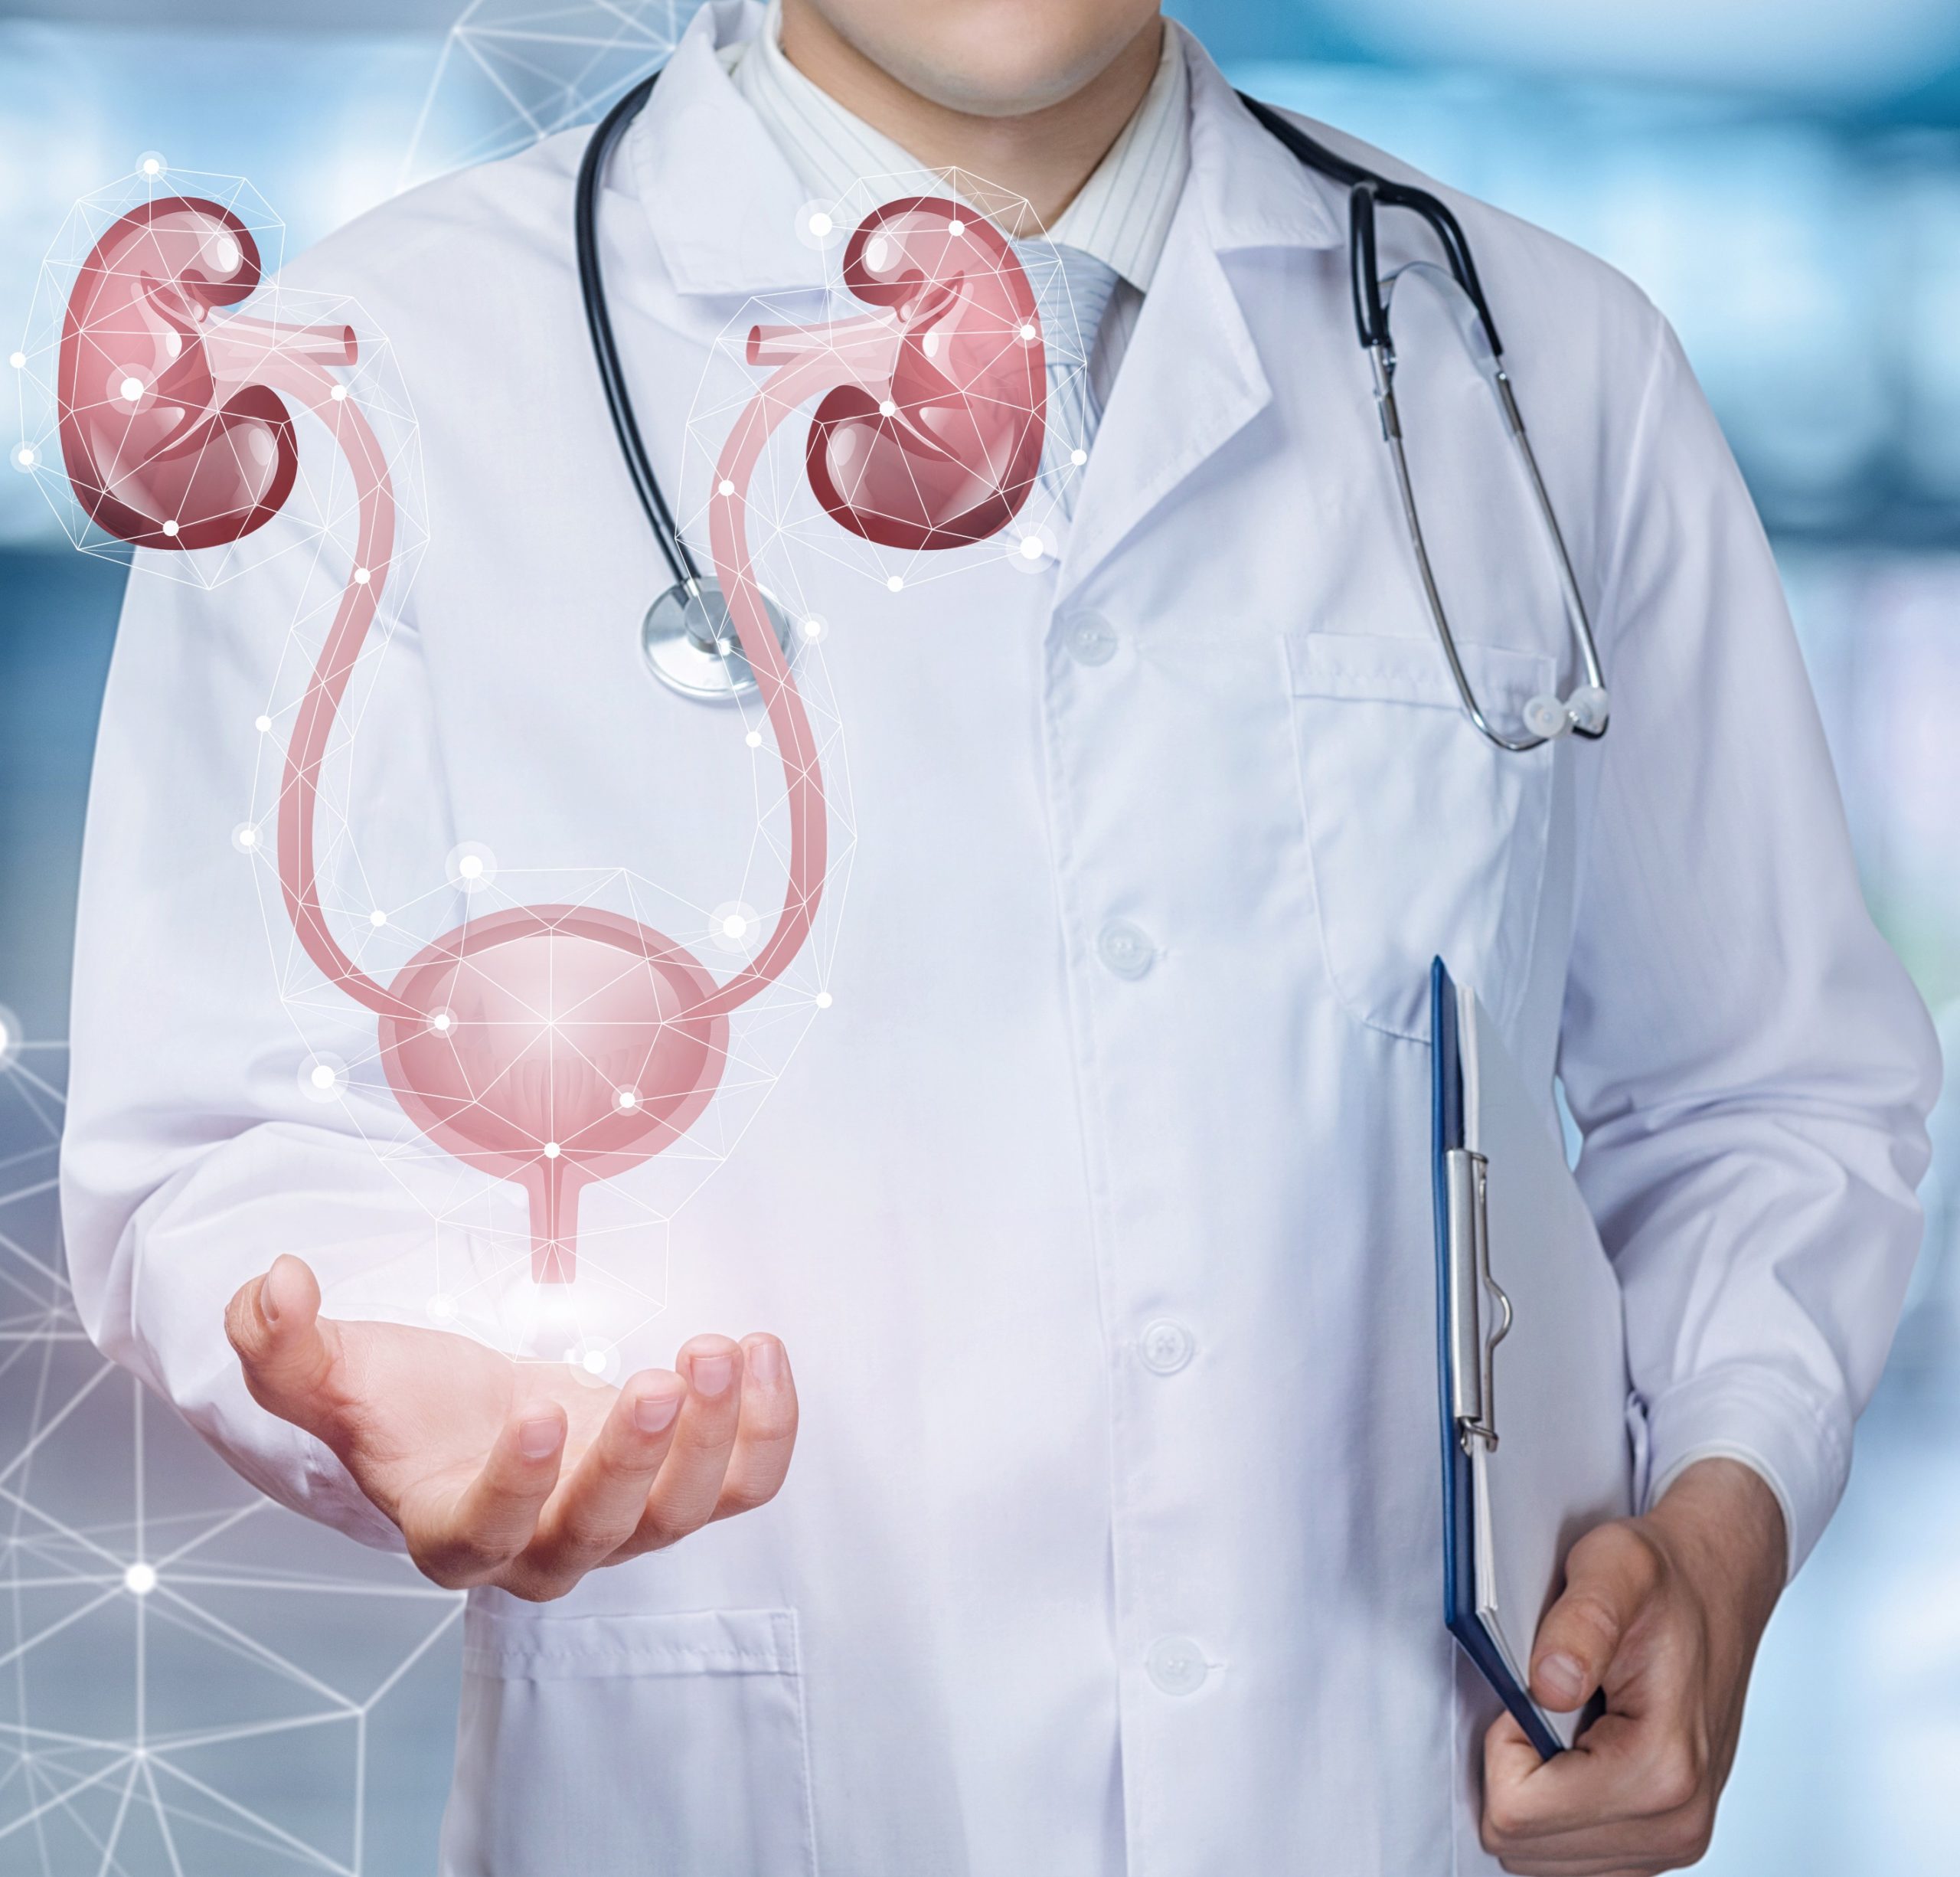 A Medical Worker Shows The Urinary System On Blurred Background.